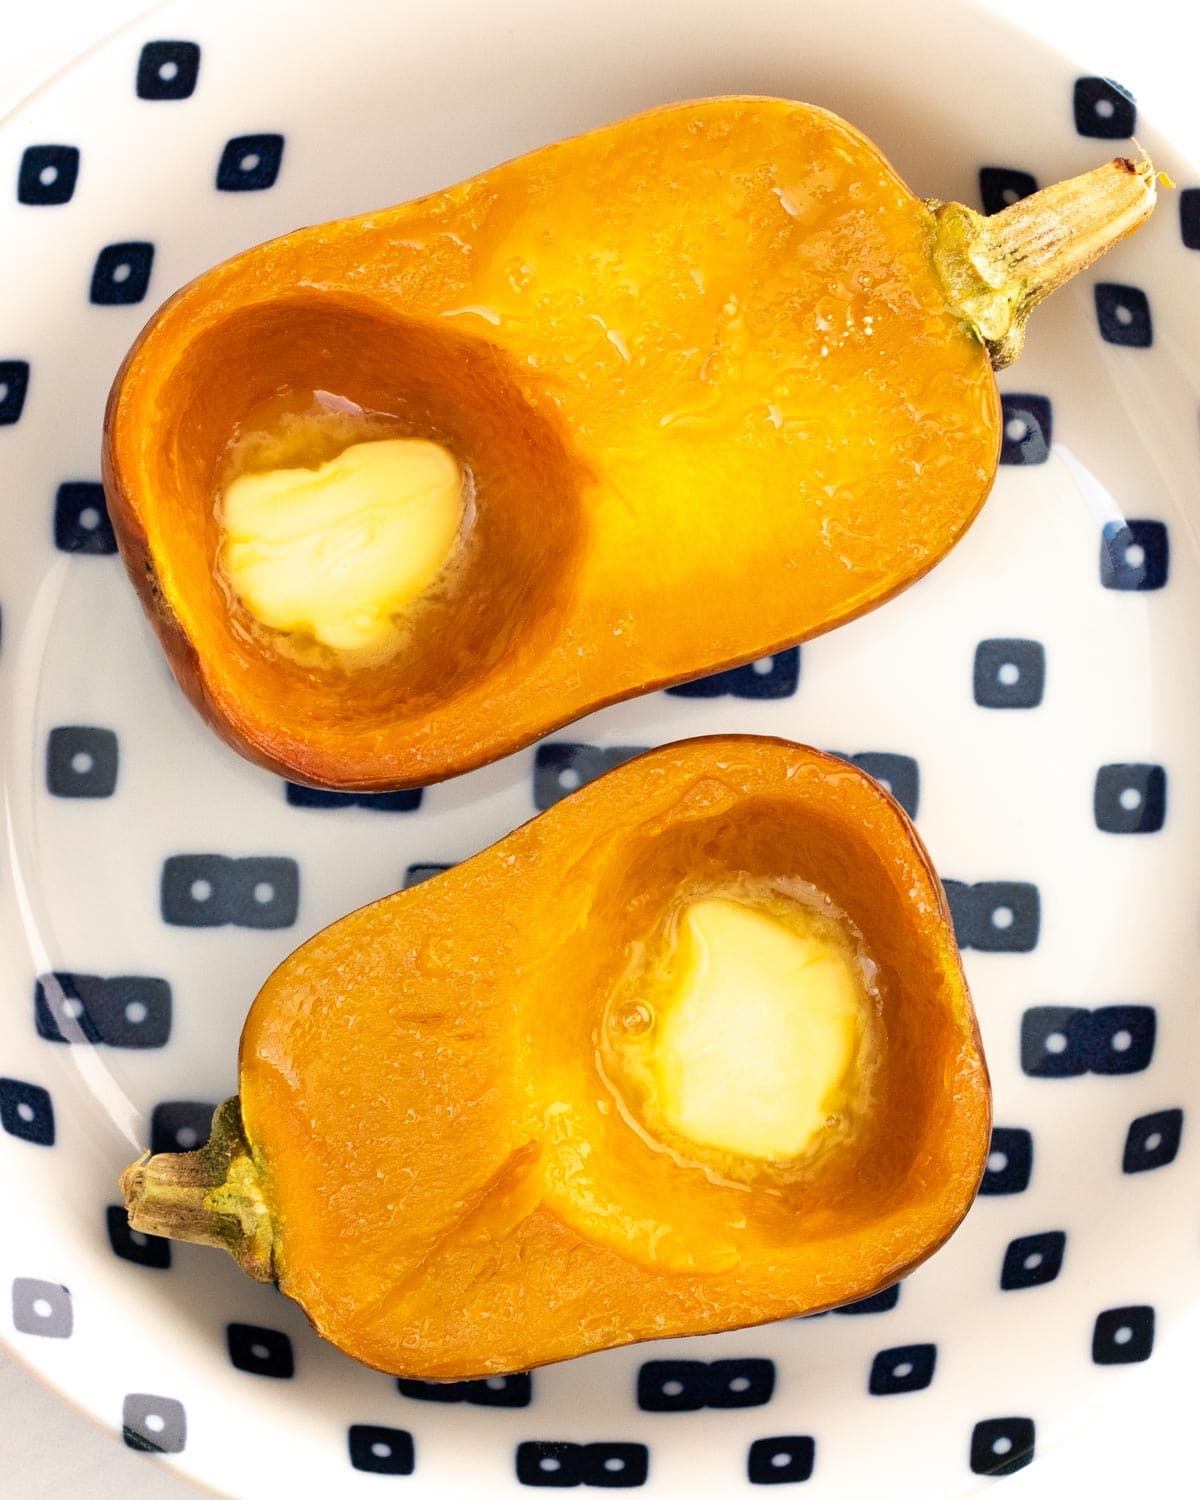 Roasted honeynut squash halves with a pat of melting butter in each cavity served on a white plate decorated with blue squares